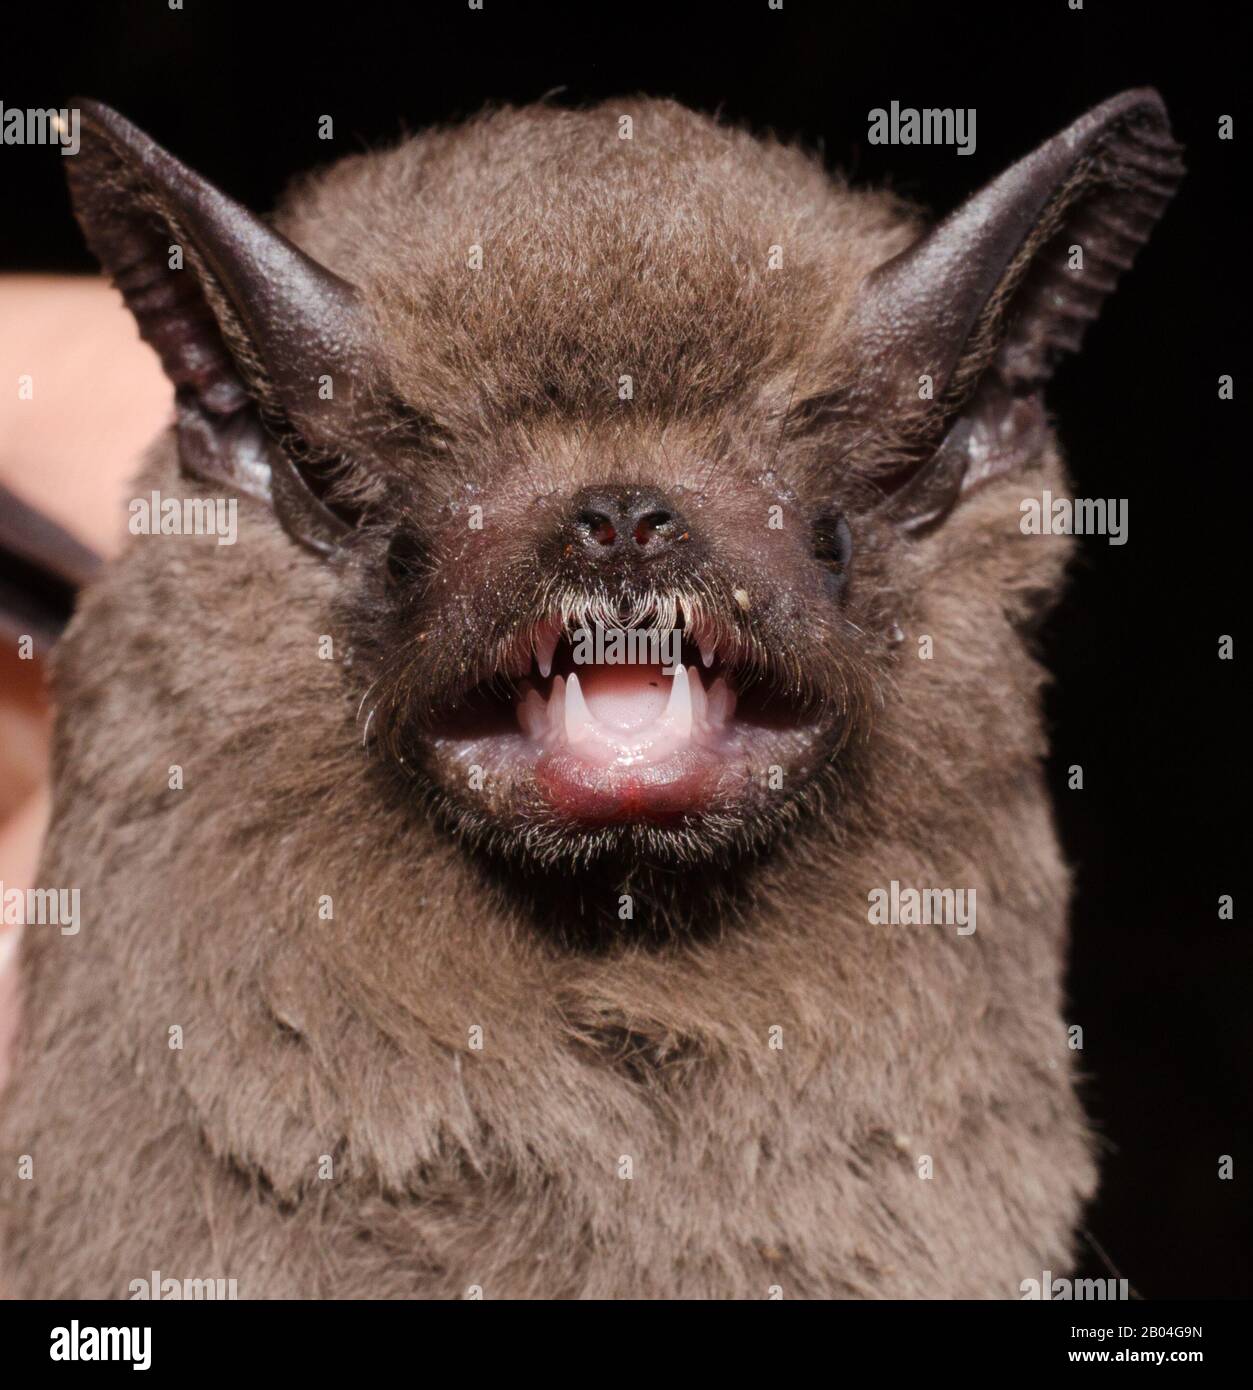 Porttrait of Brazilian bat The greater dog-like bat (Peropteryx kappleri) is a bat species from Central America and South America. Stock Photo